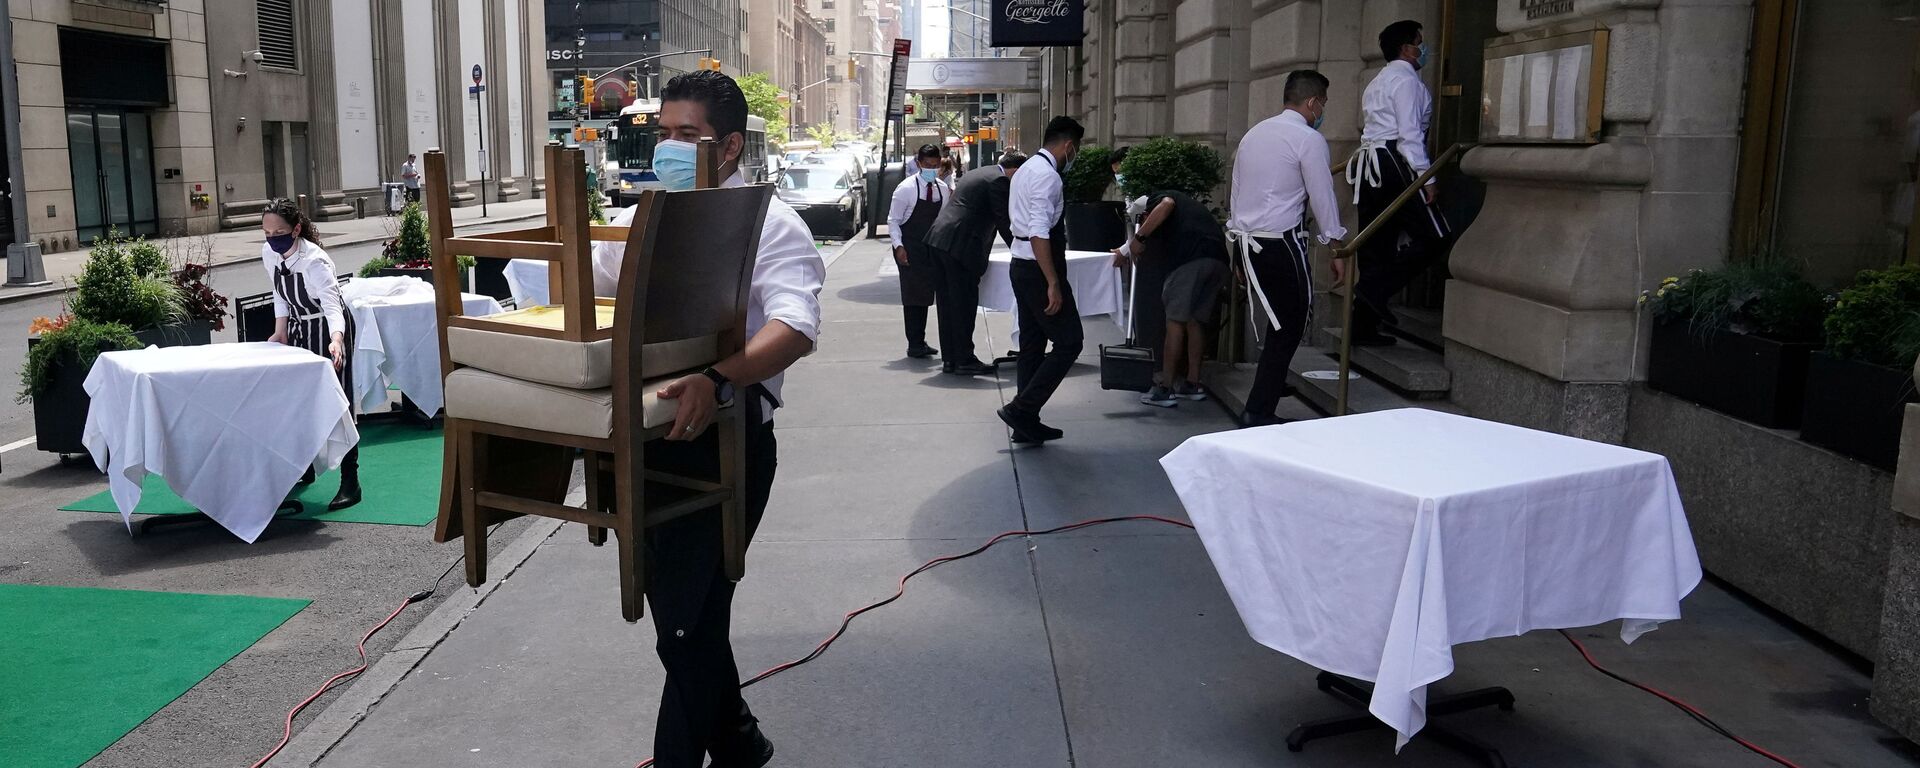 FILE PHOTO: A waiter sets up tables in front of a restaurant on a street on the first day of the phase two re-opening of businesses following the outbreak of the coronavirus disease (COVID-19), in the Manhattan borough of New York City, New York, U.S., June 22, 2020.  - Sputnik International, 1920, 06.12.2021